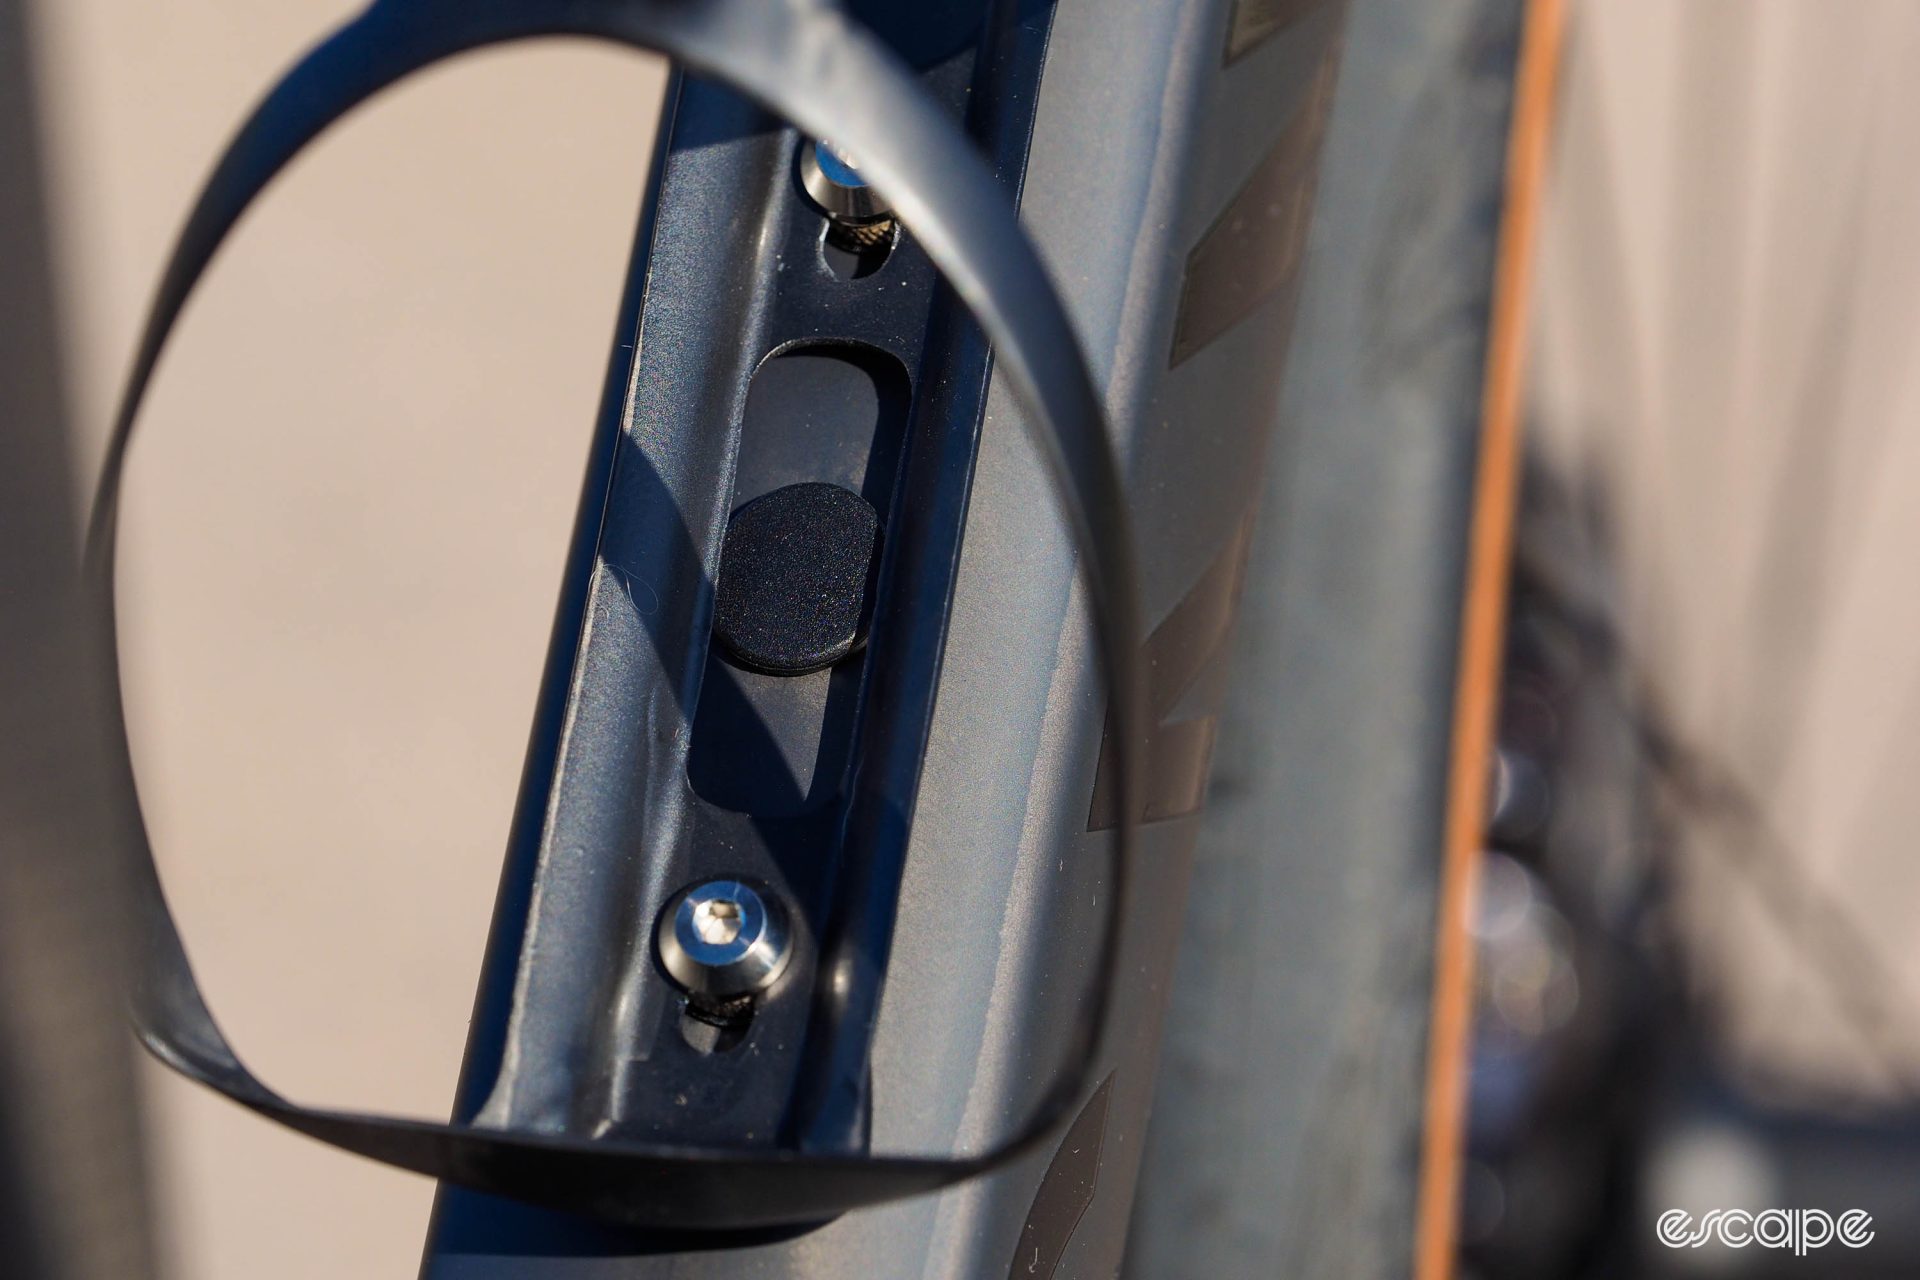 The 2024 Endurace features a nifty approach to silencing rattling lines: a zip-tie, accessible under the down tube bottle-cage mount, secures lines to keep them from banging around. 